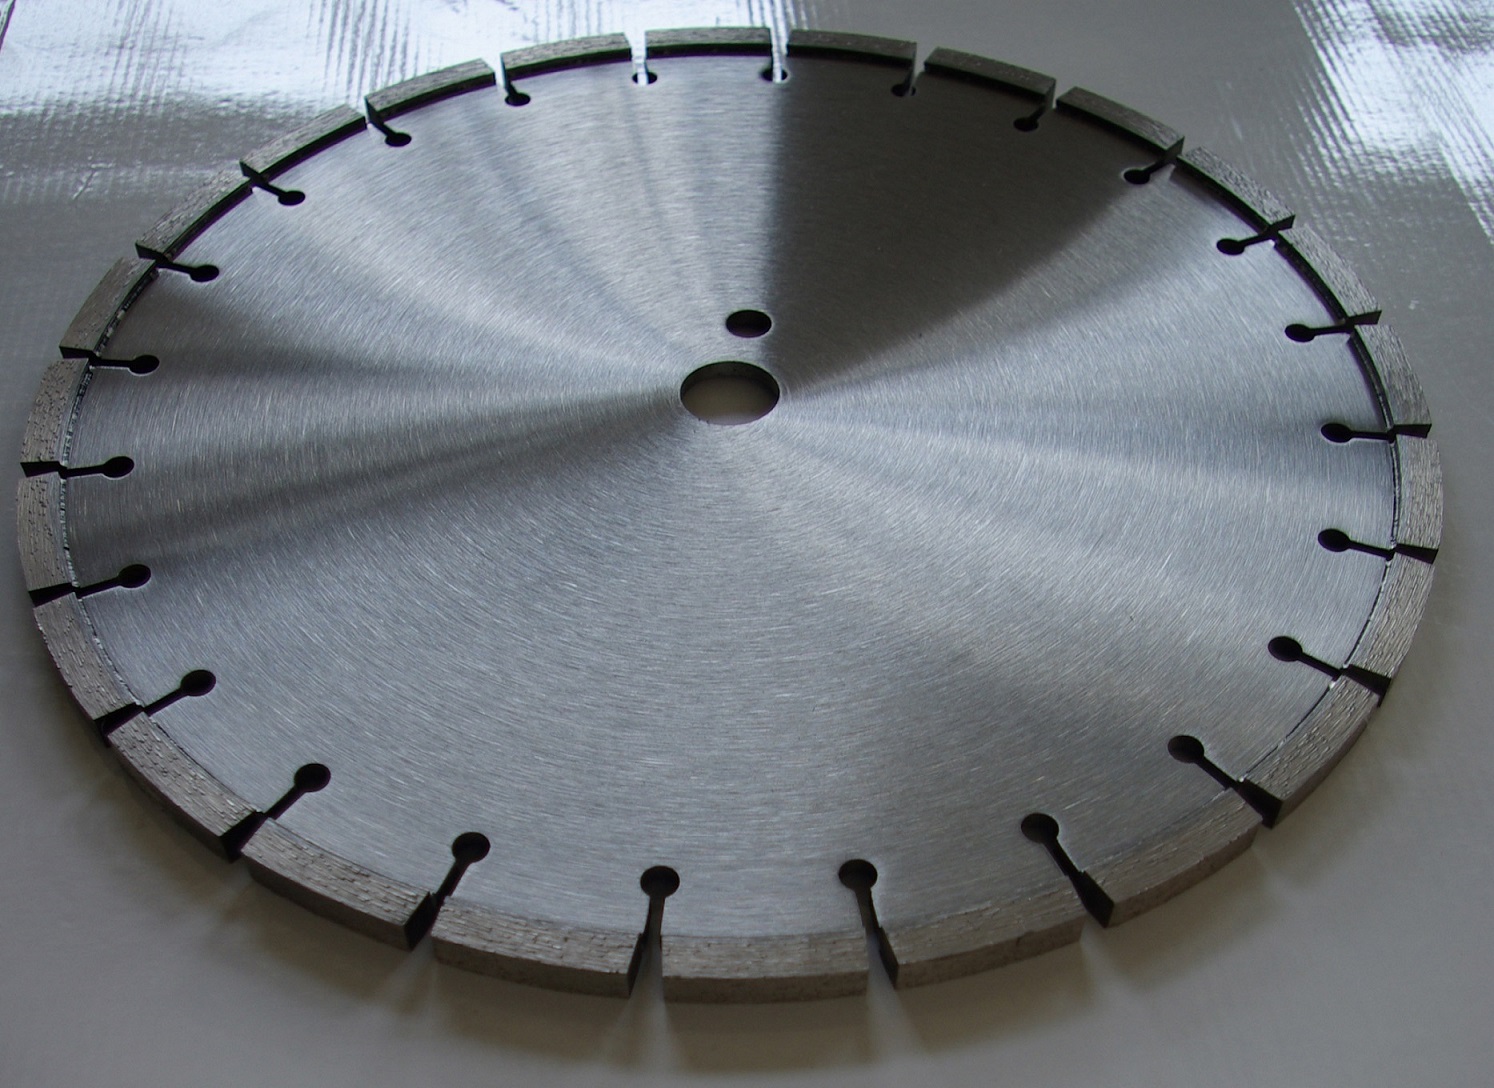 14-18" Looping Diamond Saw Blades for Loop Line Traffic Light Detector Project